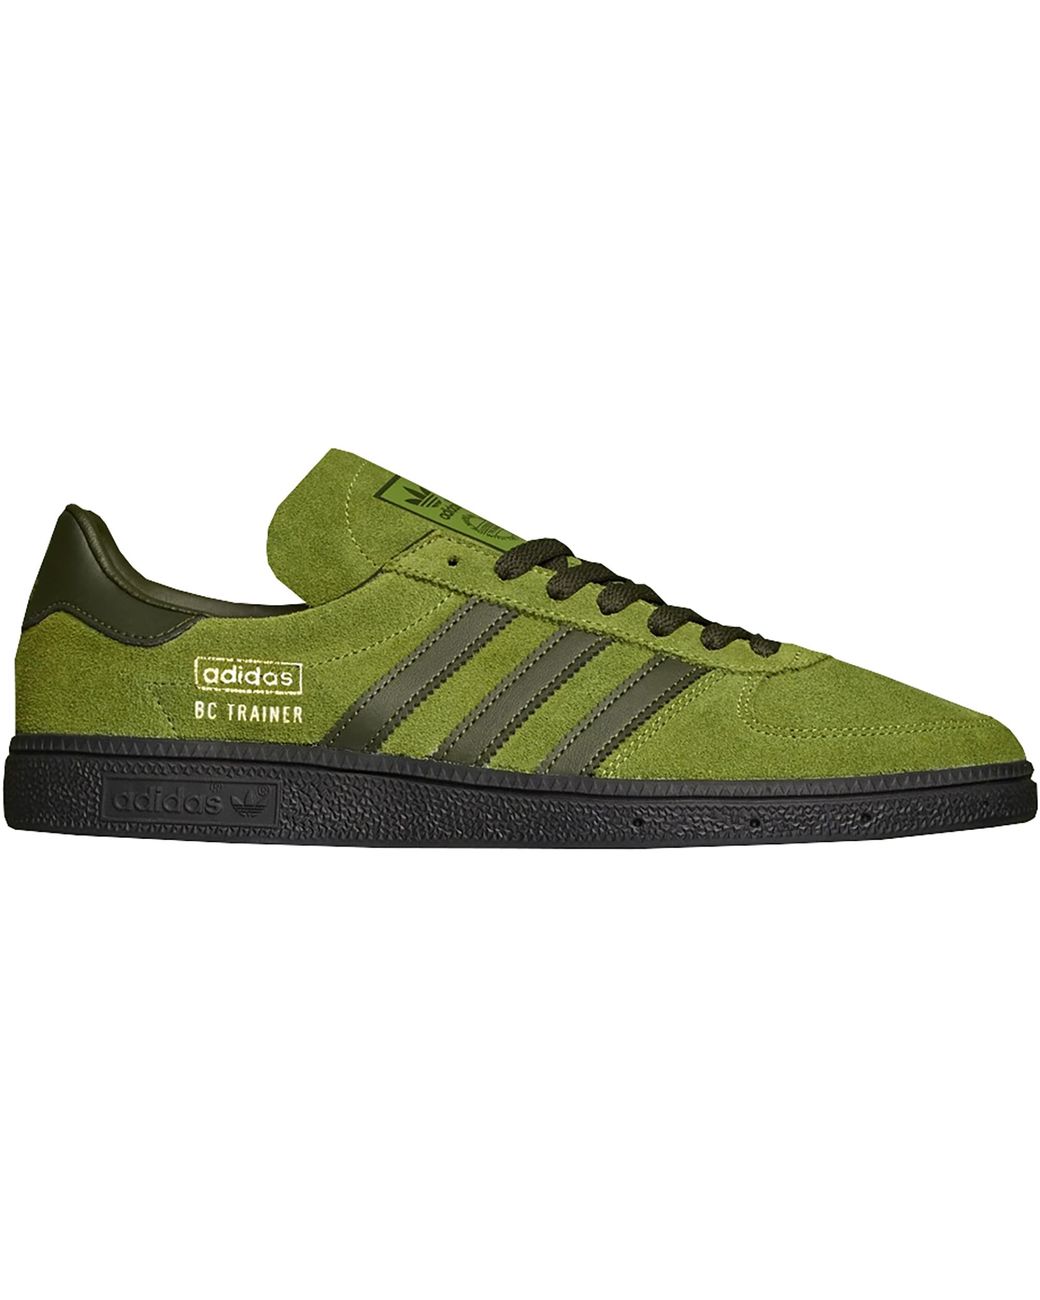 adidas green and gold trainers